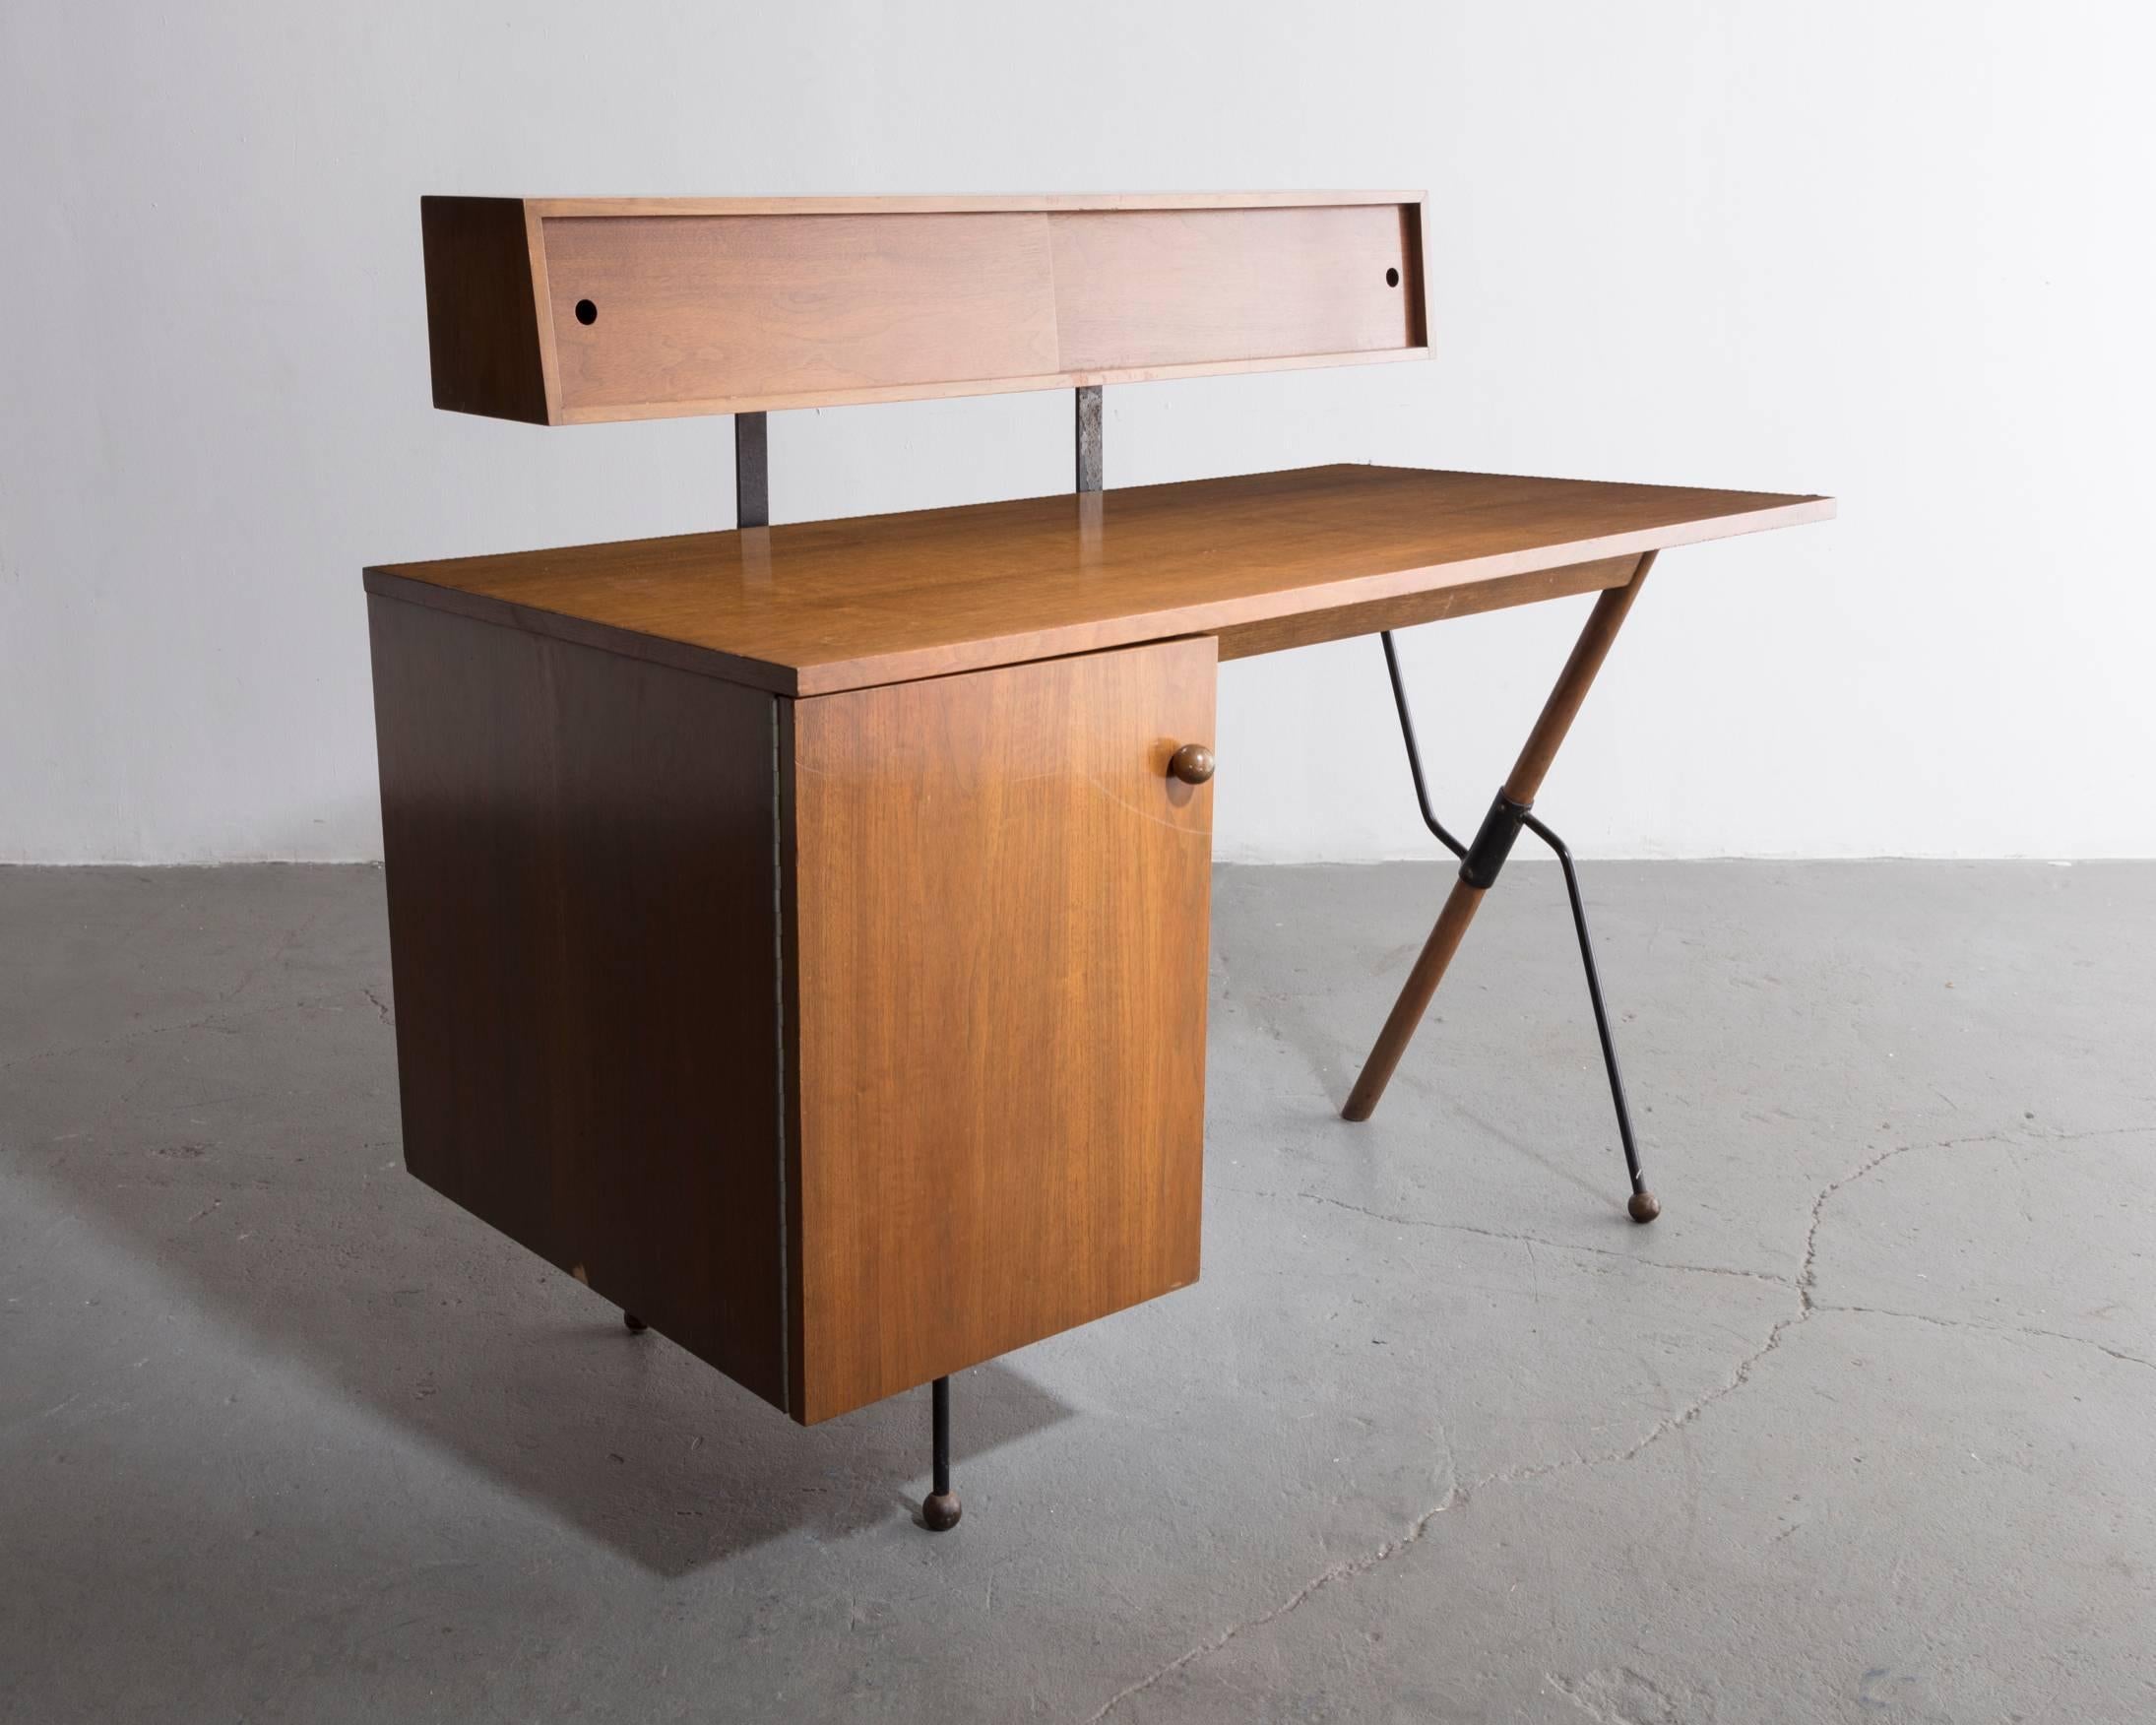 Mid-Century Modern Desk in Walnut and Iron with Pencil Box, by Greta Magnusson Grossman, 1952